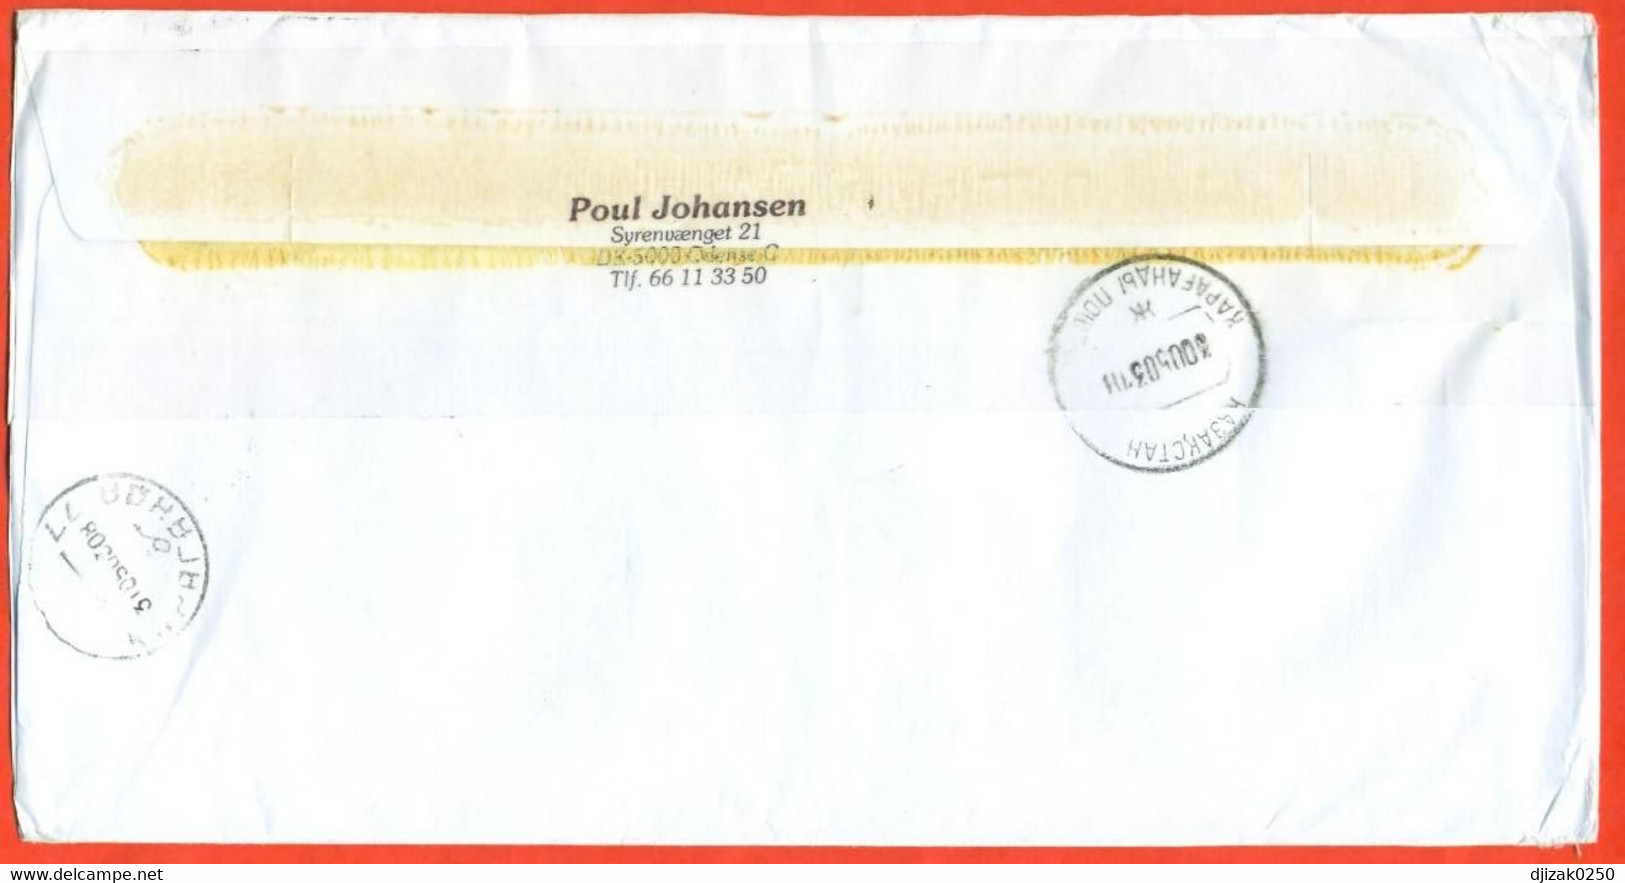 Denmark 2003. The Envelope  Passed Through The Mail. Airmail. - Covers & Documents